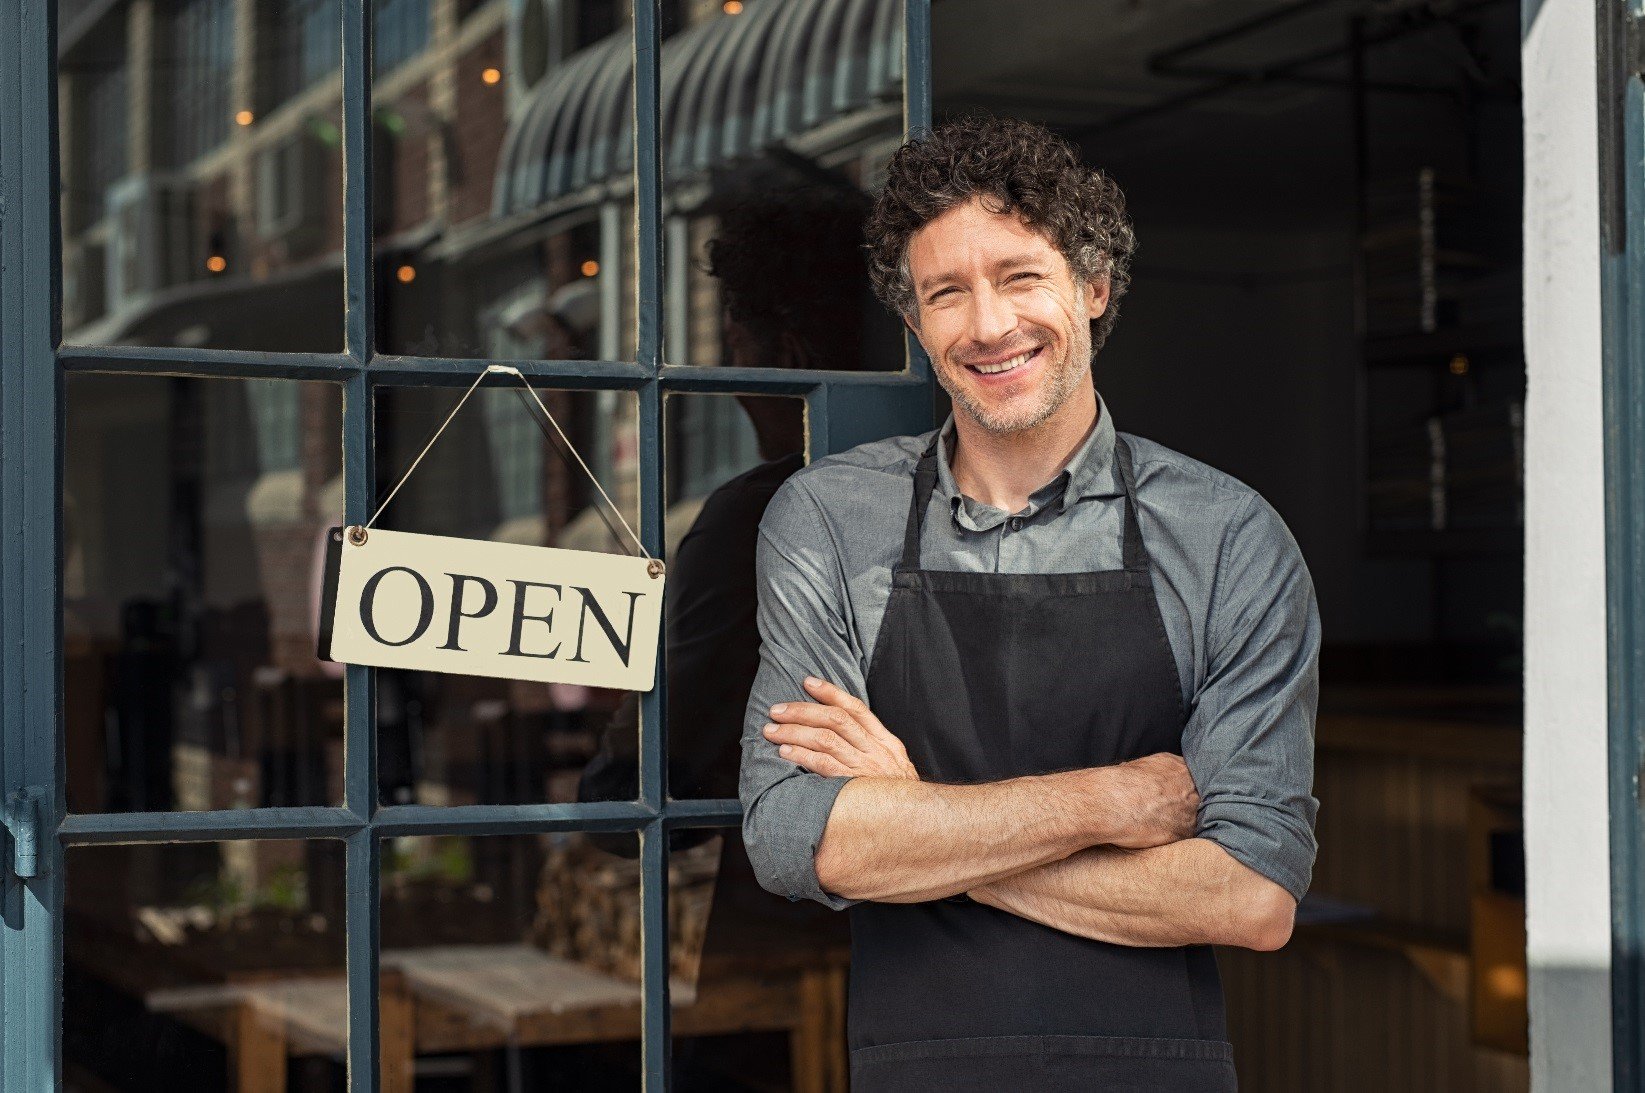 Small business owner standing next to an open sign